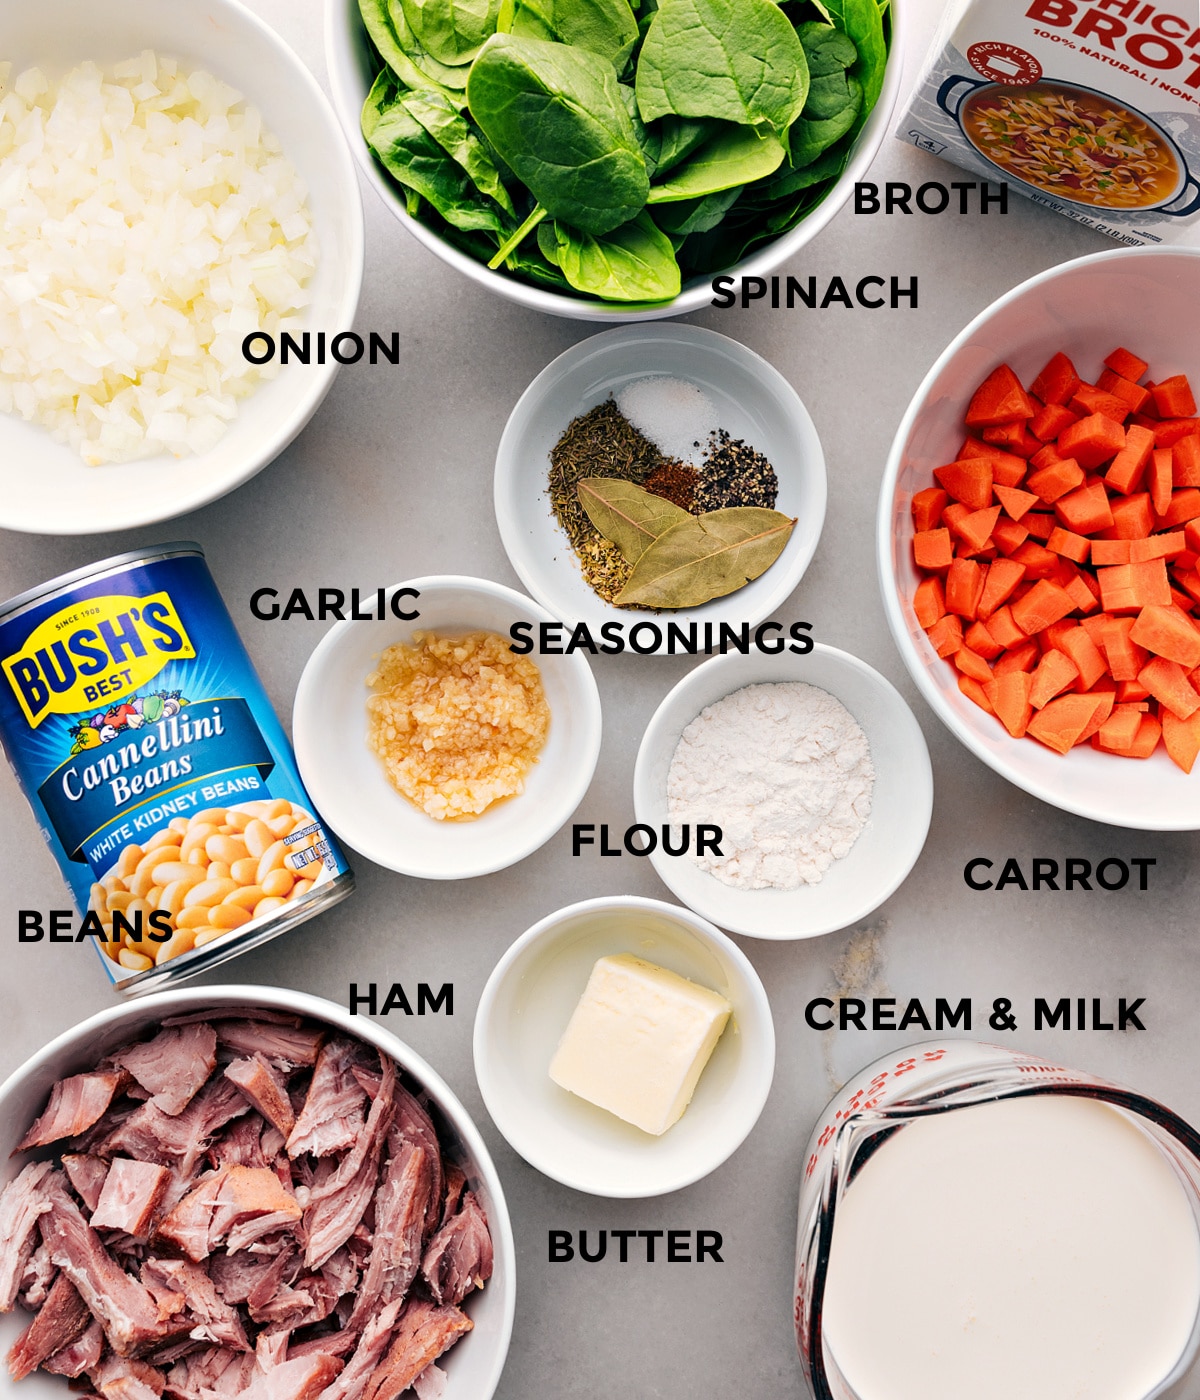 Ingredients used in this dish prepped out for easy assembly.